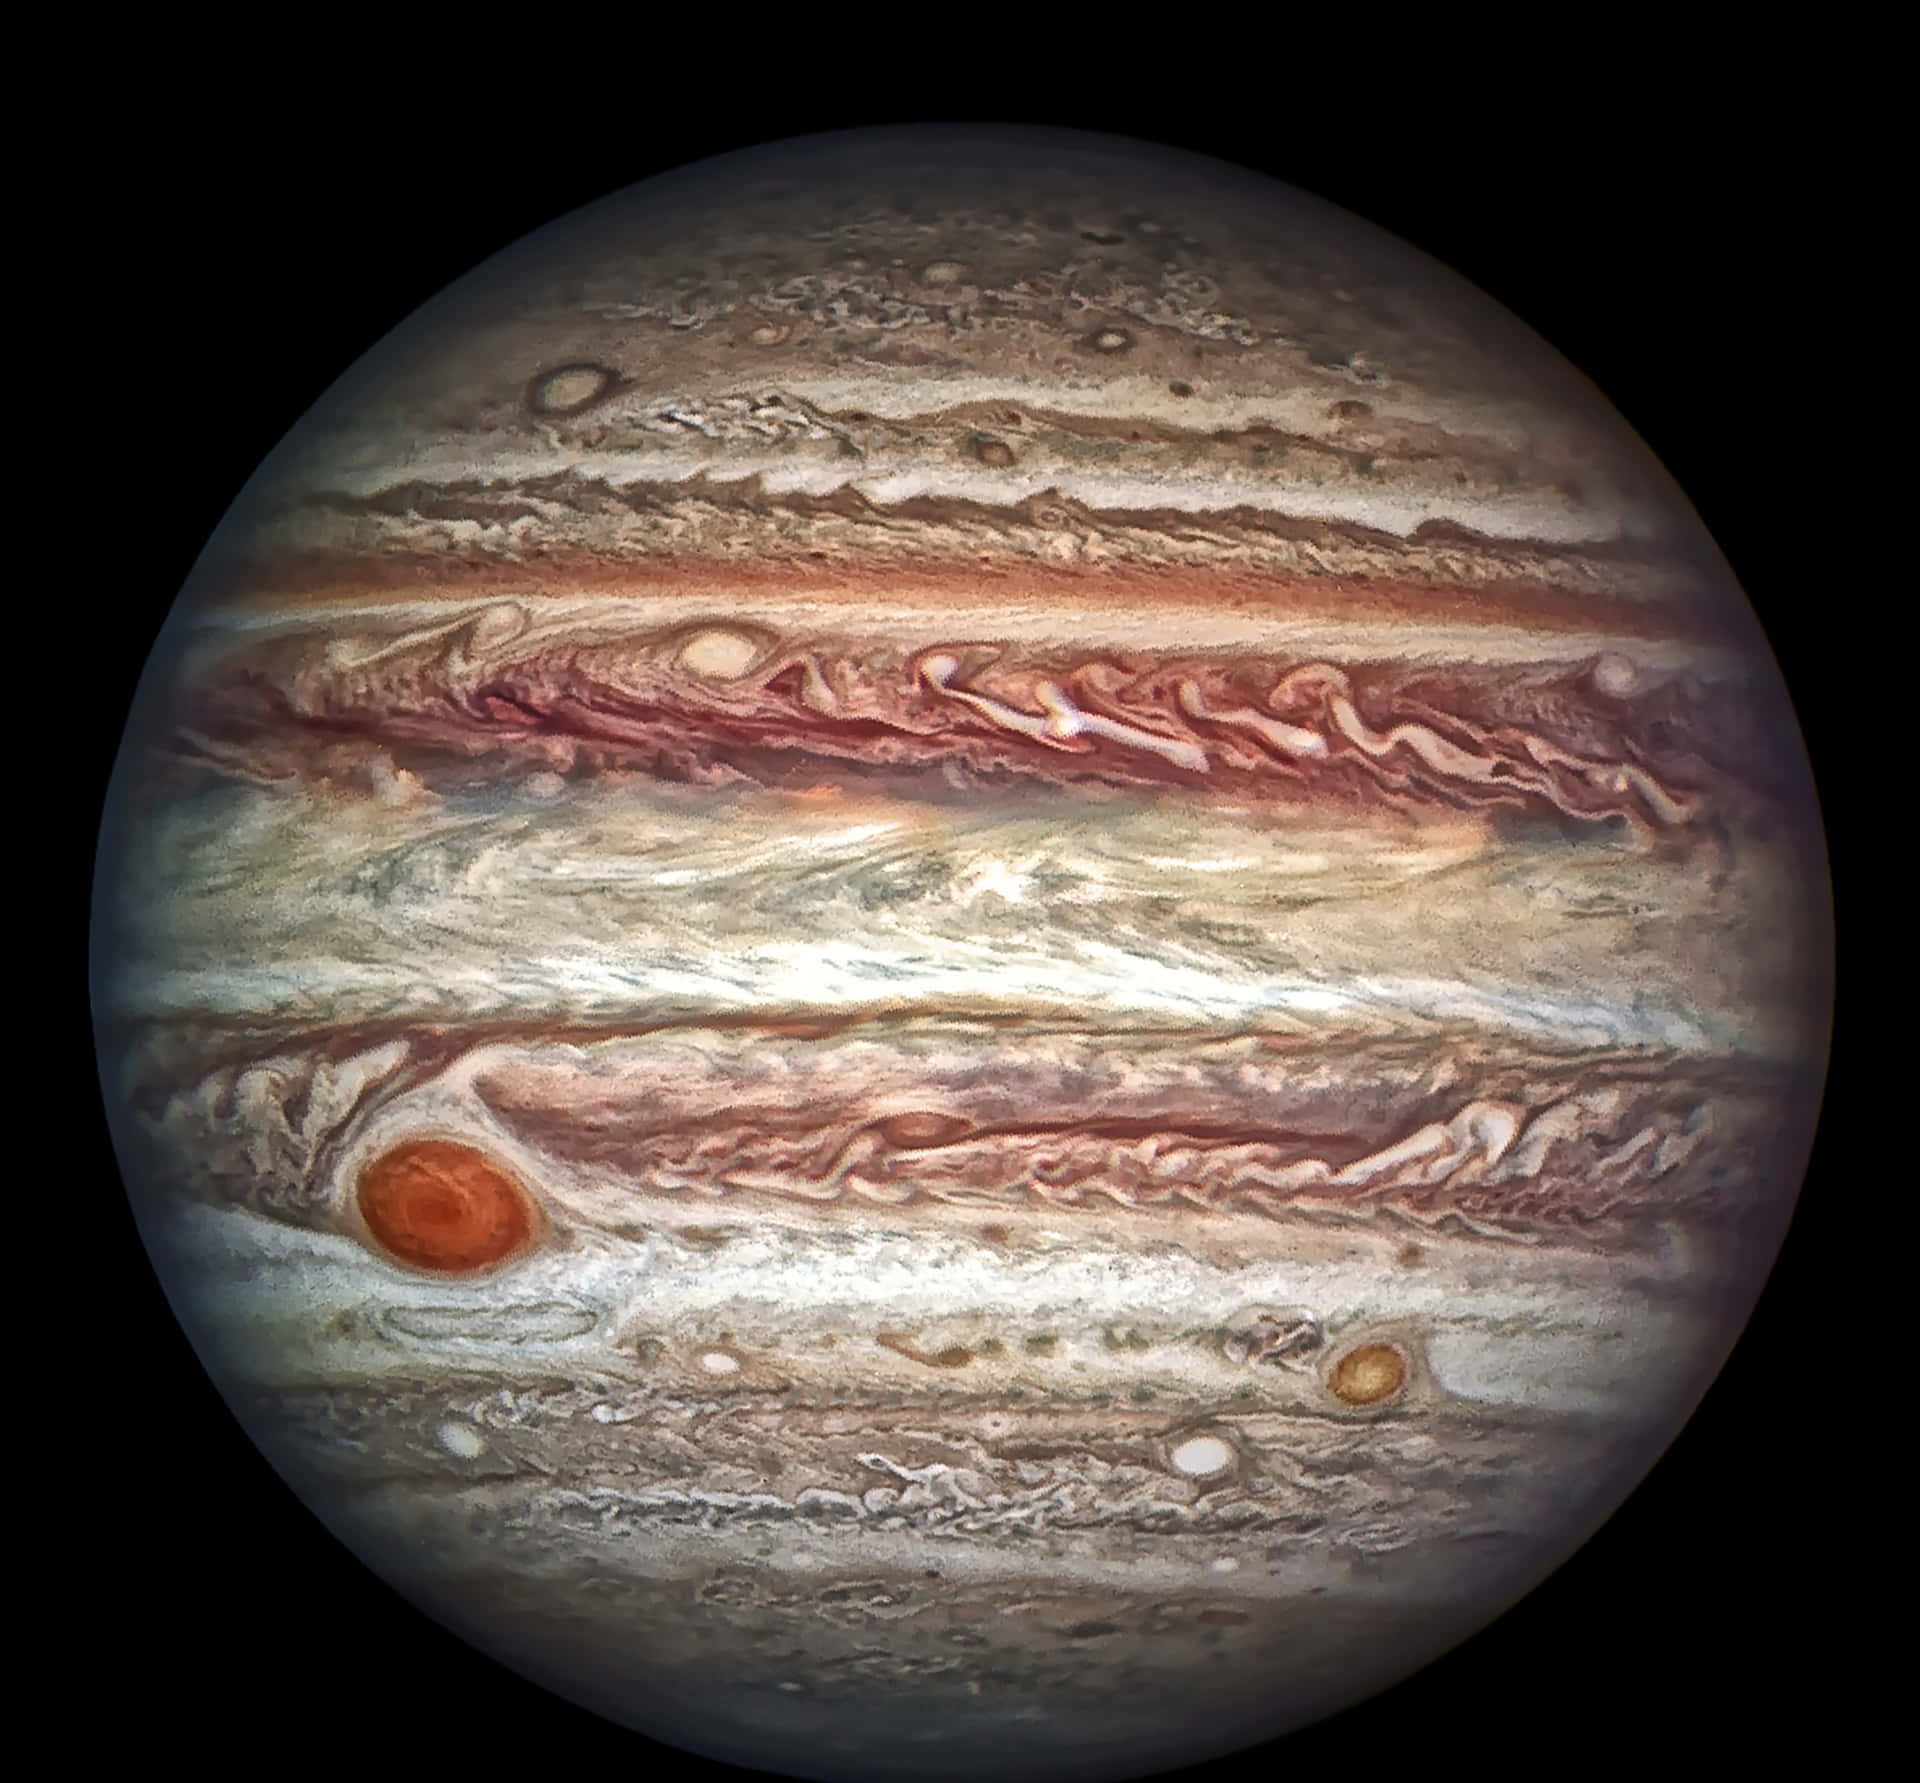 A stunning image of Jupiter's vast expanse of clouds